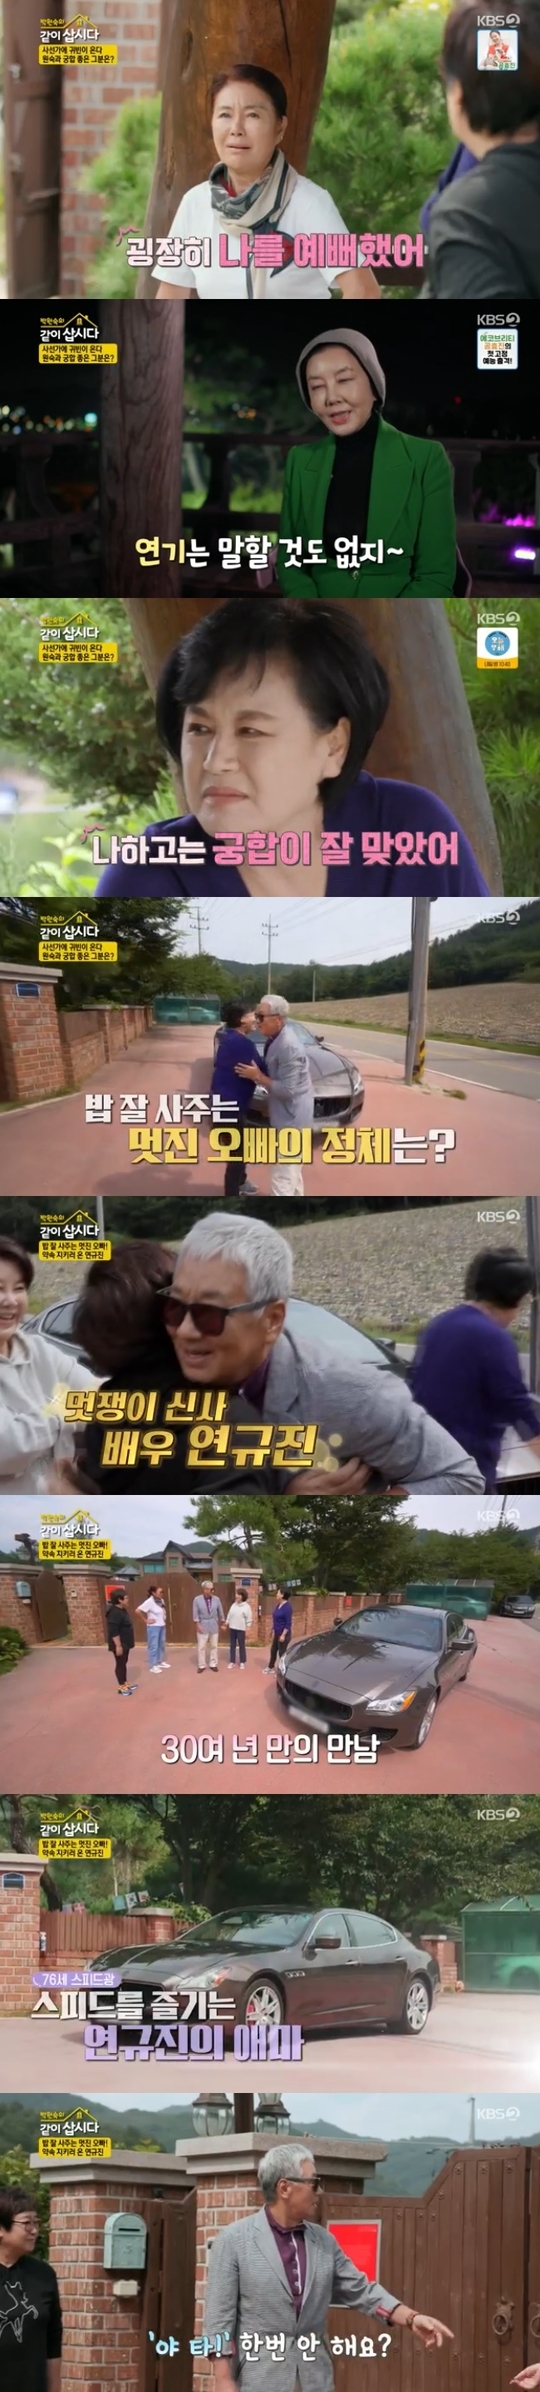 Yeon Kyu-jin showed a special fashion sense and speed in 76-year-old Age.On KBS 2TV Lets Live With Park Won-sook Season 3 broadcast on November 3, Yeon Kyu-jin visited the oblique as a guest.Kim Chung even put on a banner written in his own colorful national flag to prepare for the guests. Kim Chung said, This is not enough.She was very pretty of me.When Park Won-sook asked, Why are there so many people who are pretty to you? Kim Chung said, I was so pretty by my male seniors.Ive never been very pretty to my seniors, said Hye Eun Yi, who expected that she would be sick as a blue-eyed man because she cant watch it on TV these days.Kim Yeong-Ran praised Yeon Kyu-jin, saying, I think I wore a mountain bike and I am a great gourmet. I bought rice well, I was good at warm words to my juniors and I was good at acting.Kim Chung also said, My personality was very good, and Hye Eun Yi sympathized, It appears well in my face expression.Park Won-sook surprised his younger siblings by saying, Me and The Princess and the Matchmaker hit well.Park Won-sook replied, Food The Princess and the Matchmaker, Taste, Shopping The Princess and the Matchmaker and It was not Korea.The shopping was just me and me. When Hye Eun Yi asked, Did you really think of yourself as a man then? Park Won-sook said, I did not have time to think of him as a man at that time.There was a man who liked it so much.Then I heard a heavy car noise outside the gate, and a sage was hit by a bright expression.Yeon Gyu-jin, 76, appeared in an expensive Sports car in a fashion sense that forgot Age. Kim Yeong-Ran admired the car as cool.